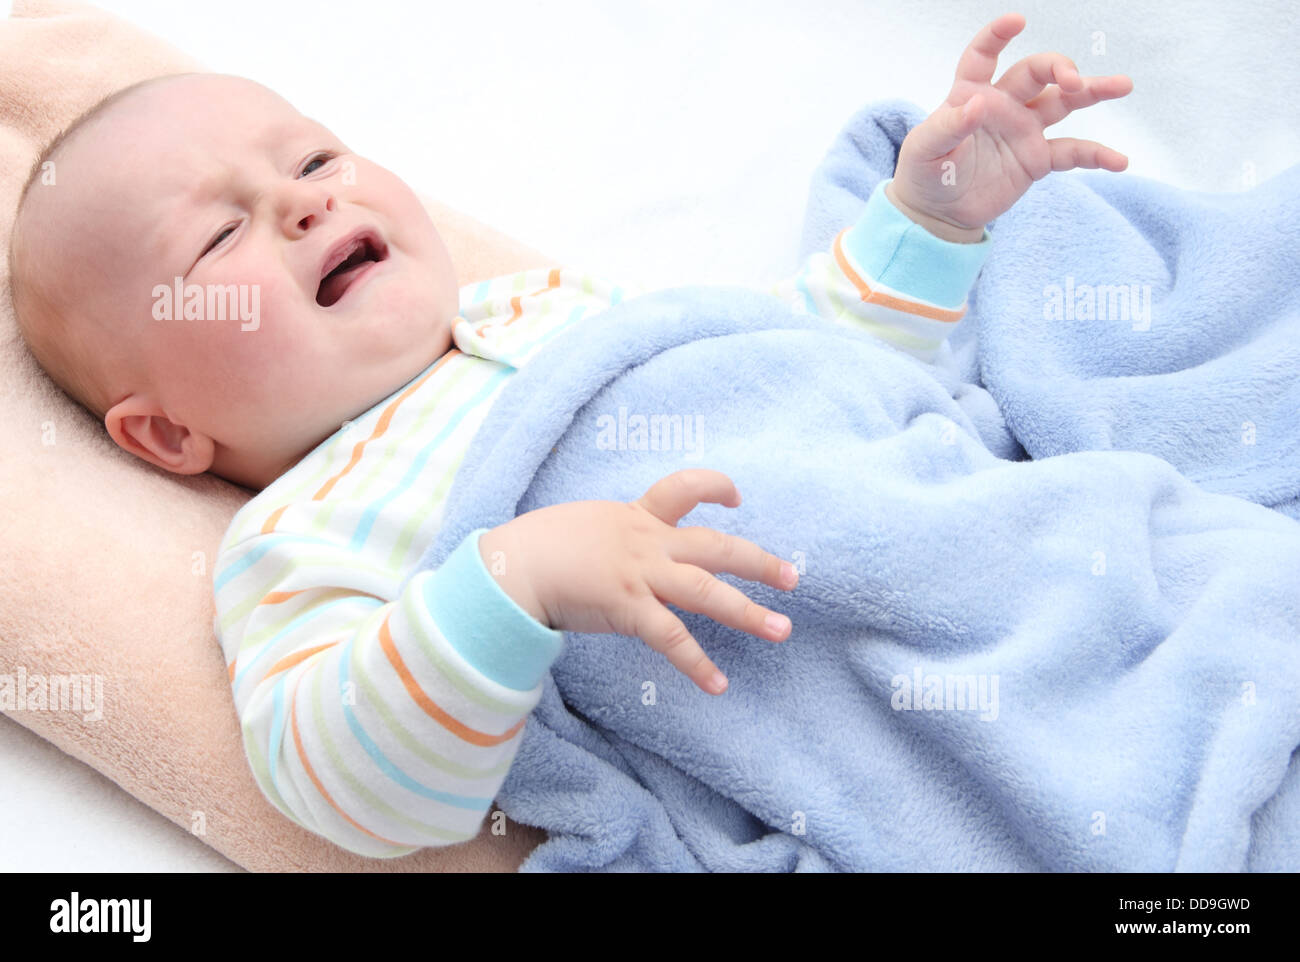 little baby crying in bed Stock Photo